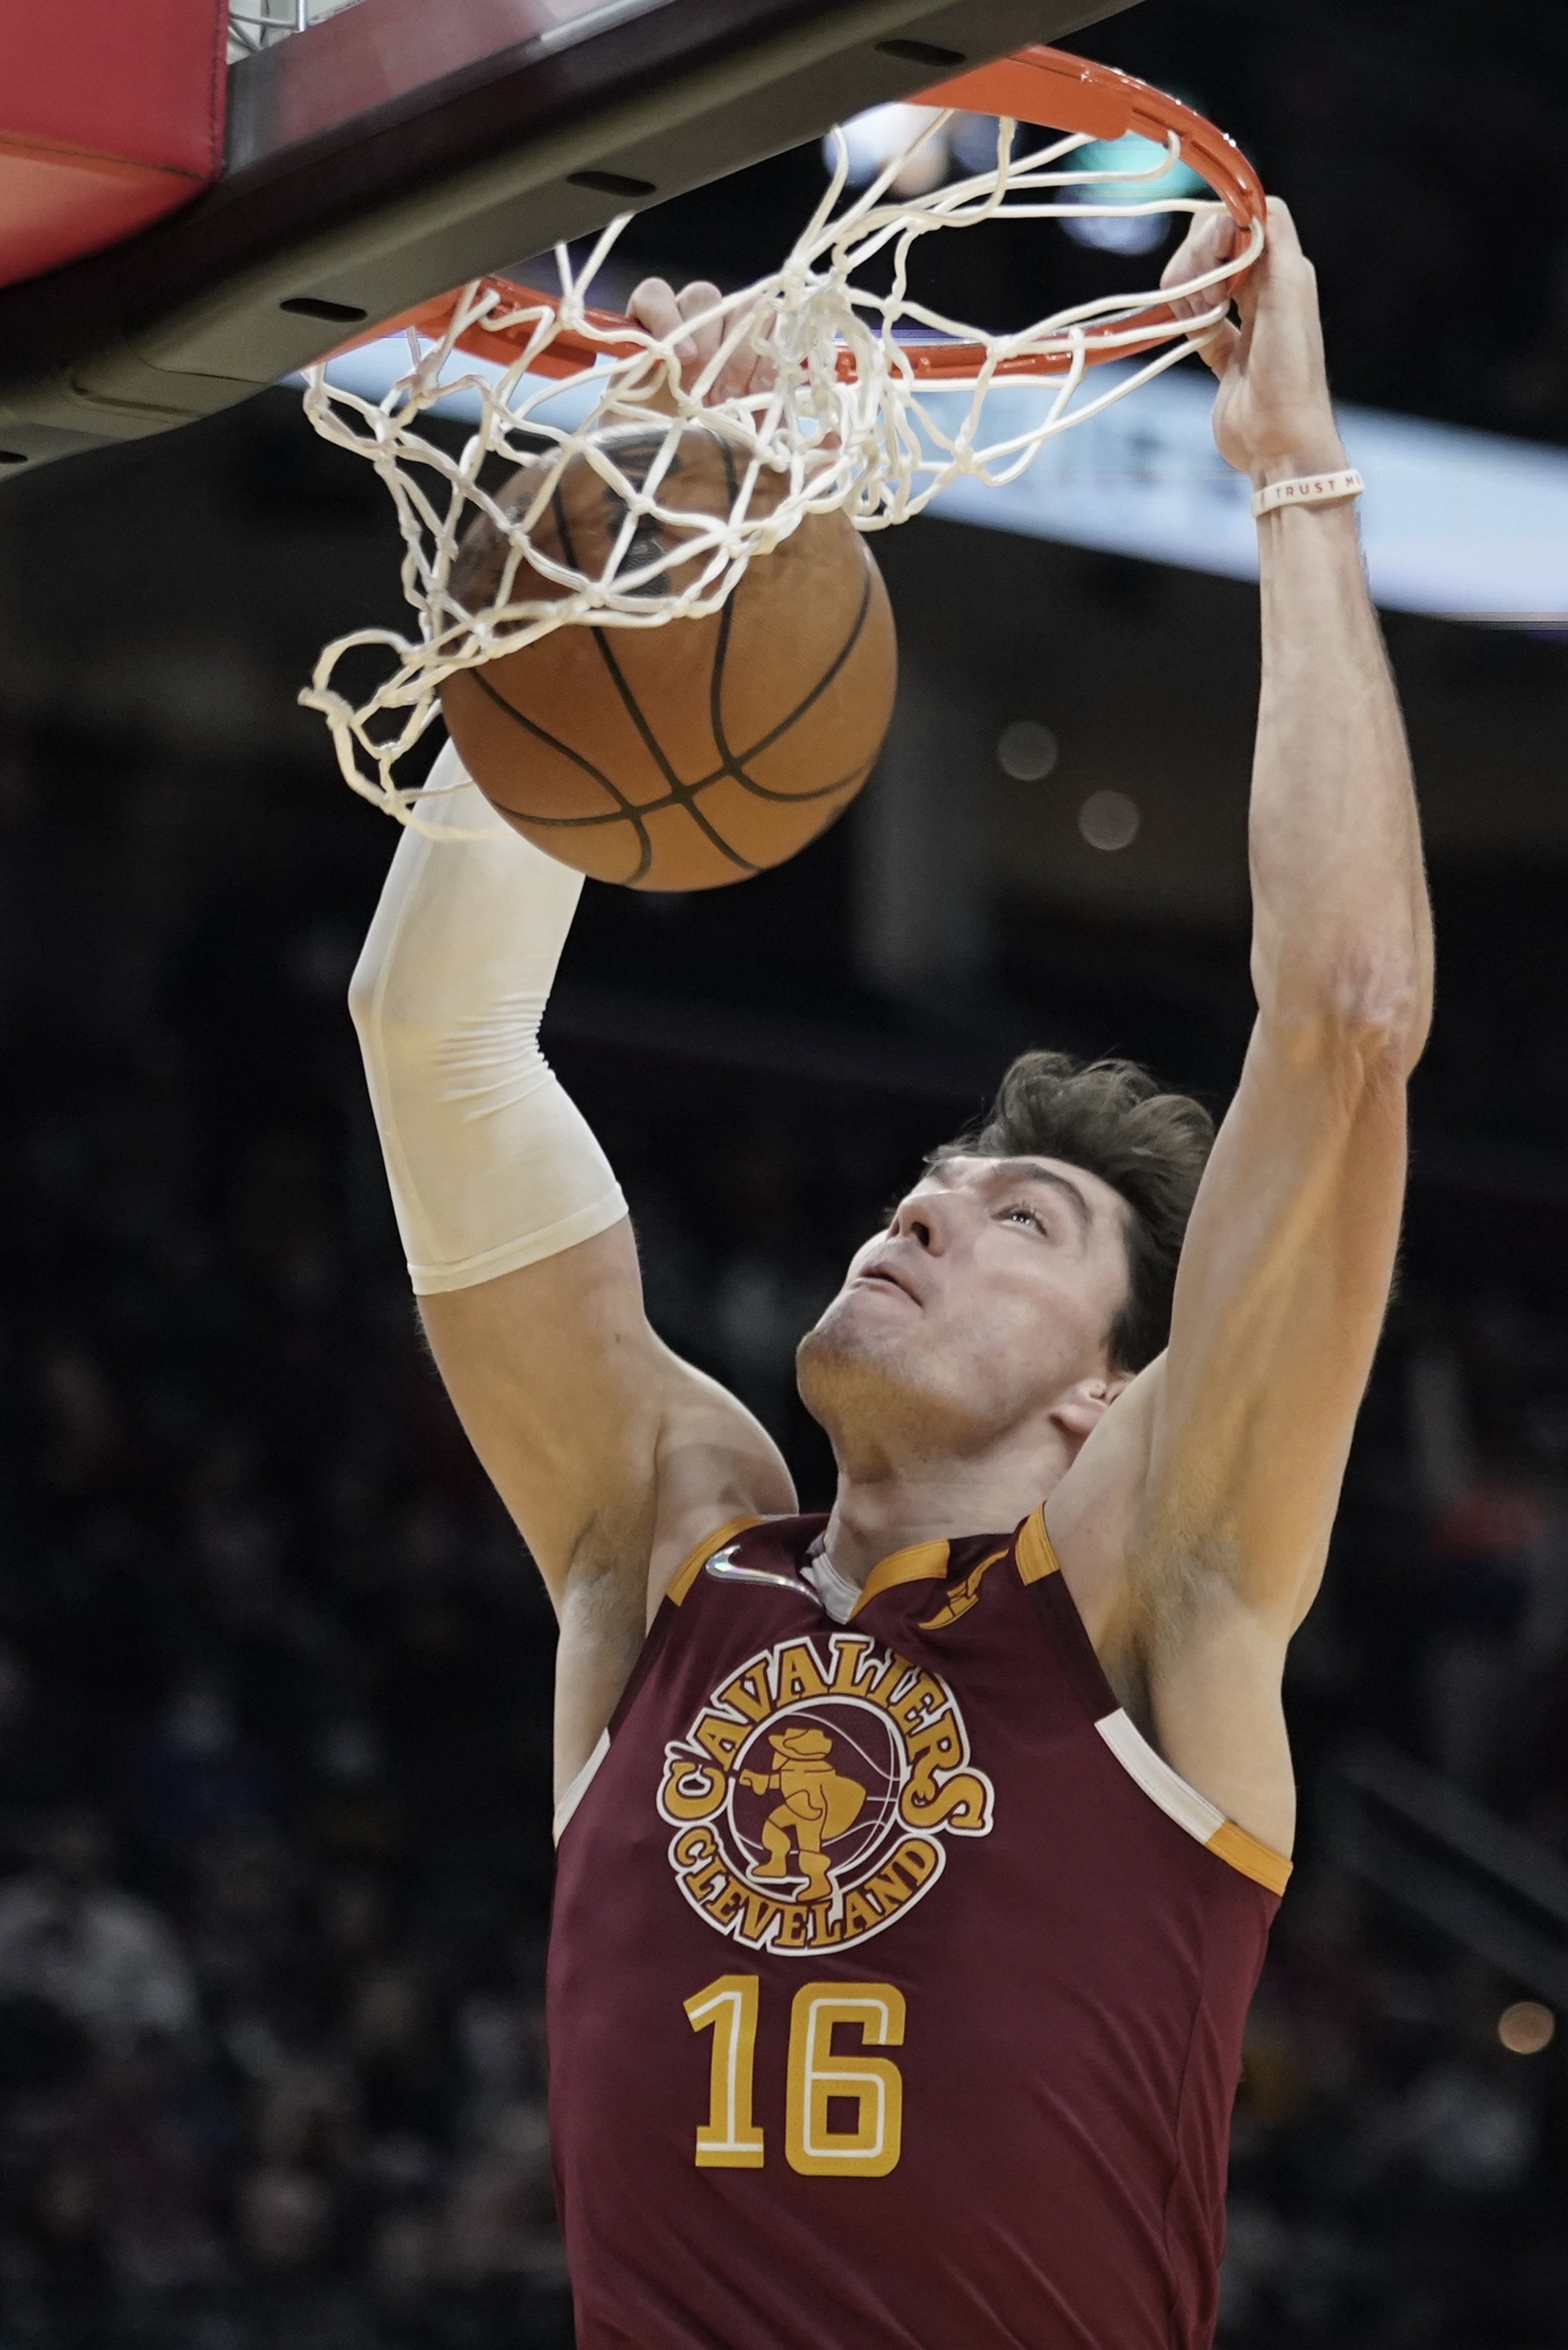 Cleveland Cavaliers' Cedi Osman dunks against the Utah Jazz in the second half of an NBA basketball game, Sunday, Dec. 5, 2021, in Cleveland. (AP Photo/Tony Dejak)